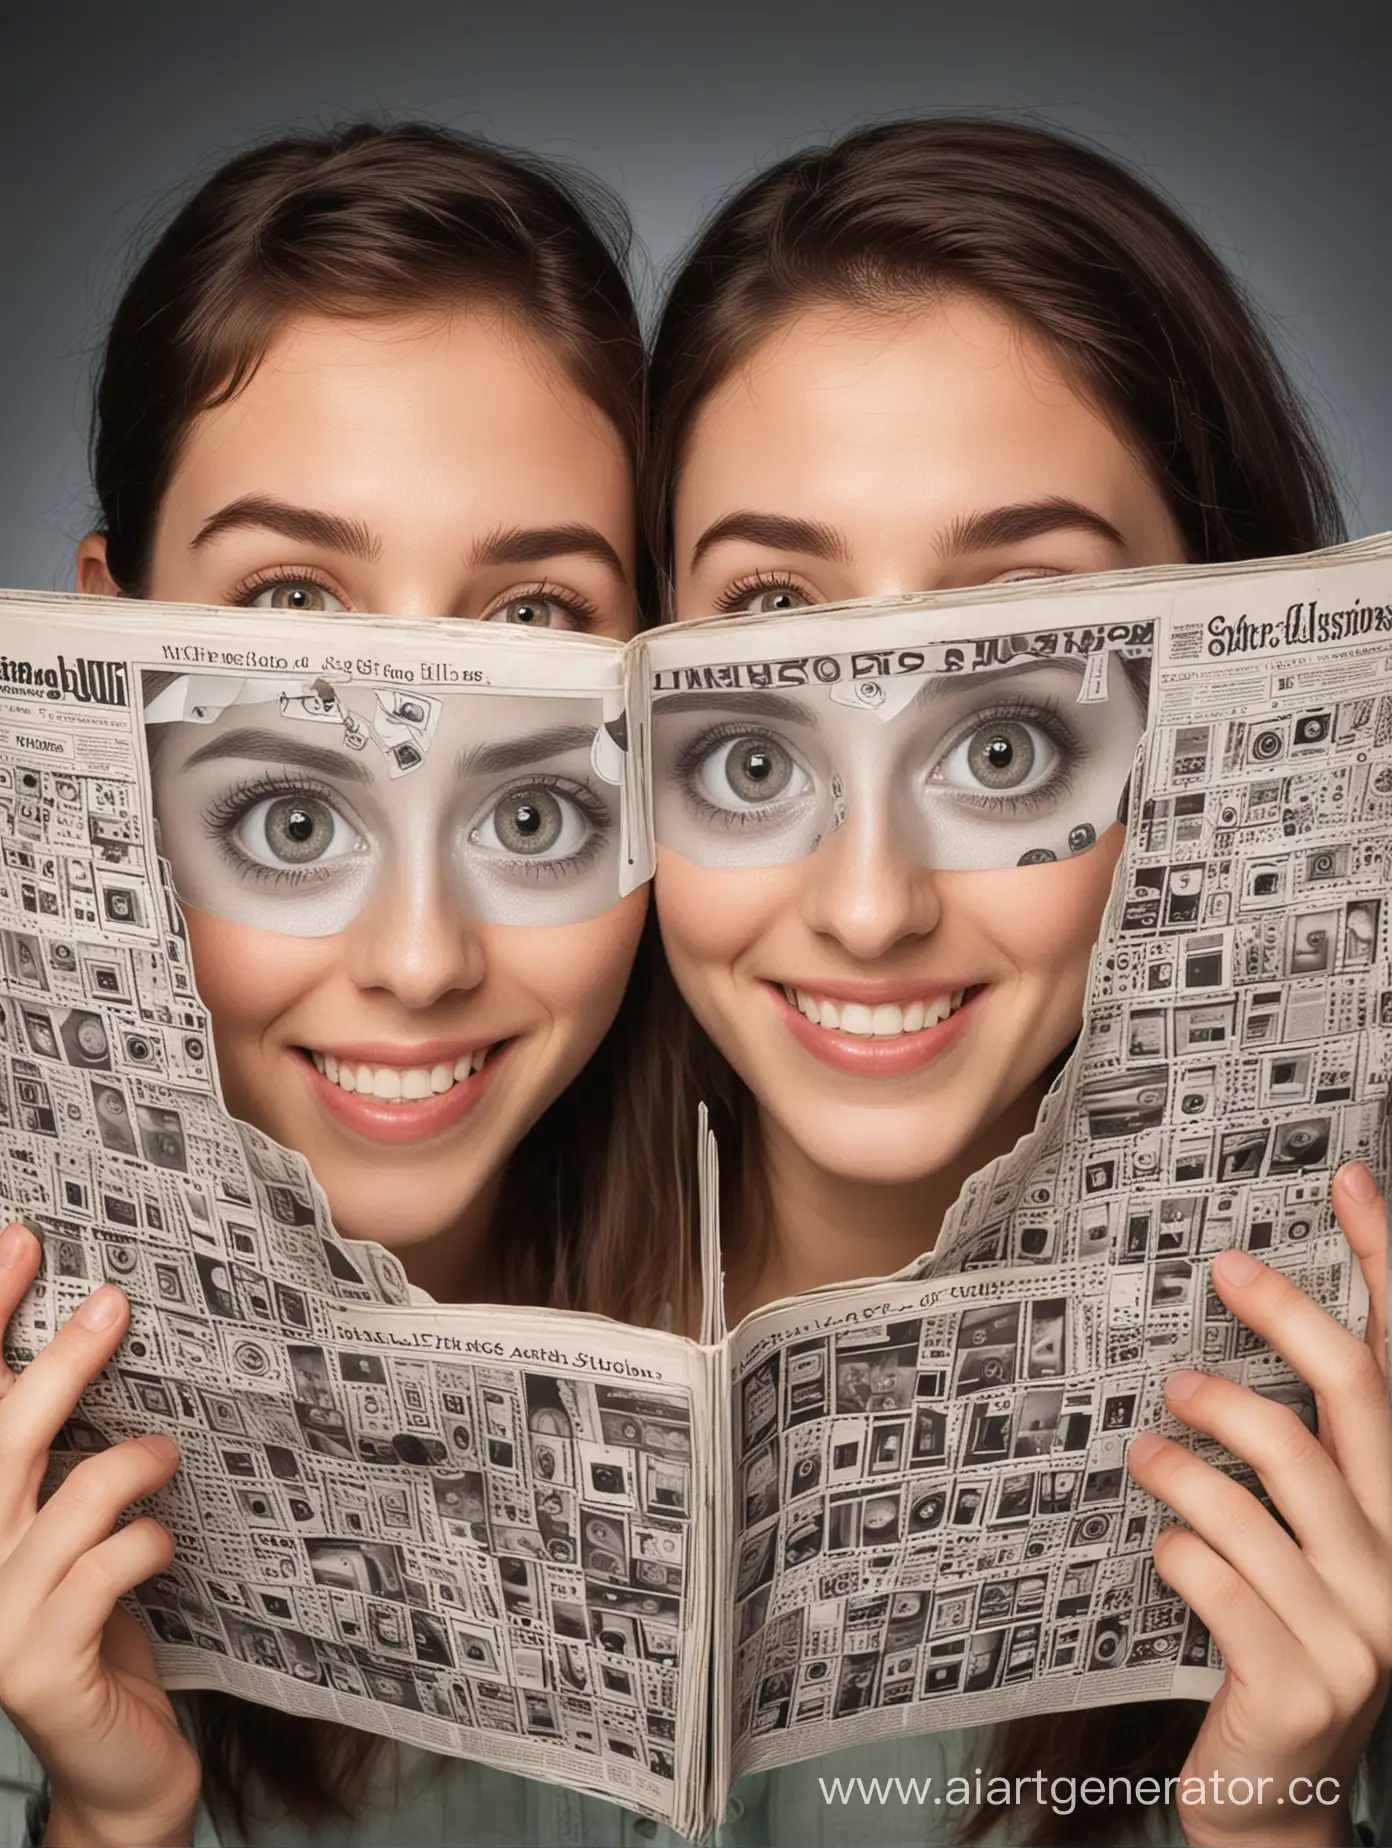 Smiling-Duo-Engaging-with-Stereo-Optical-Illusions-Magazine